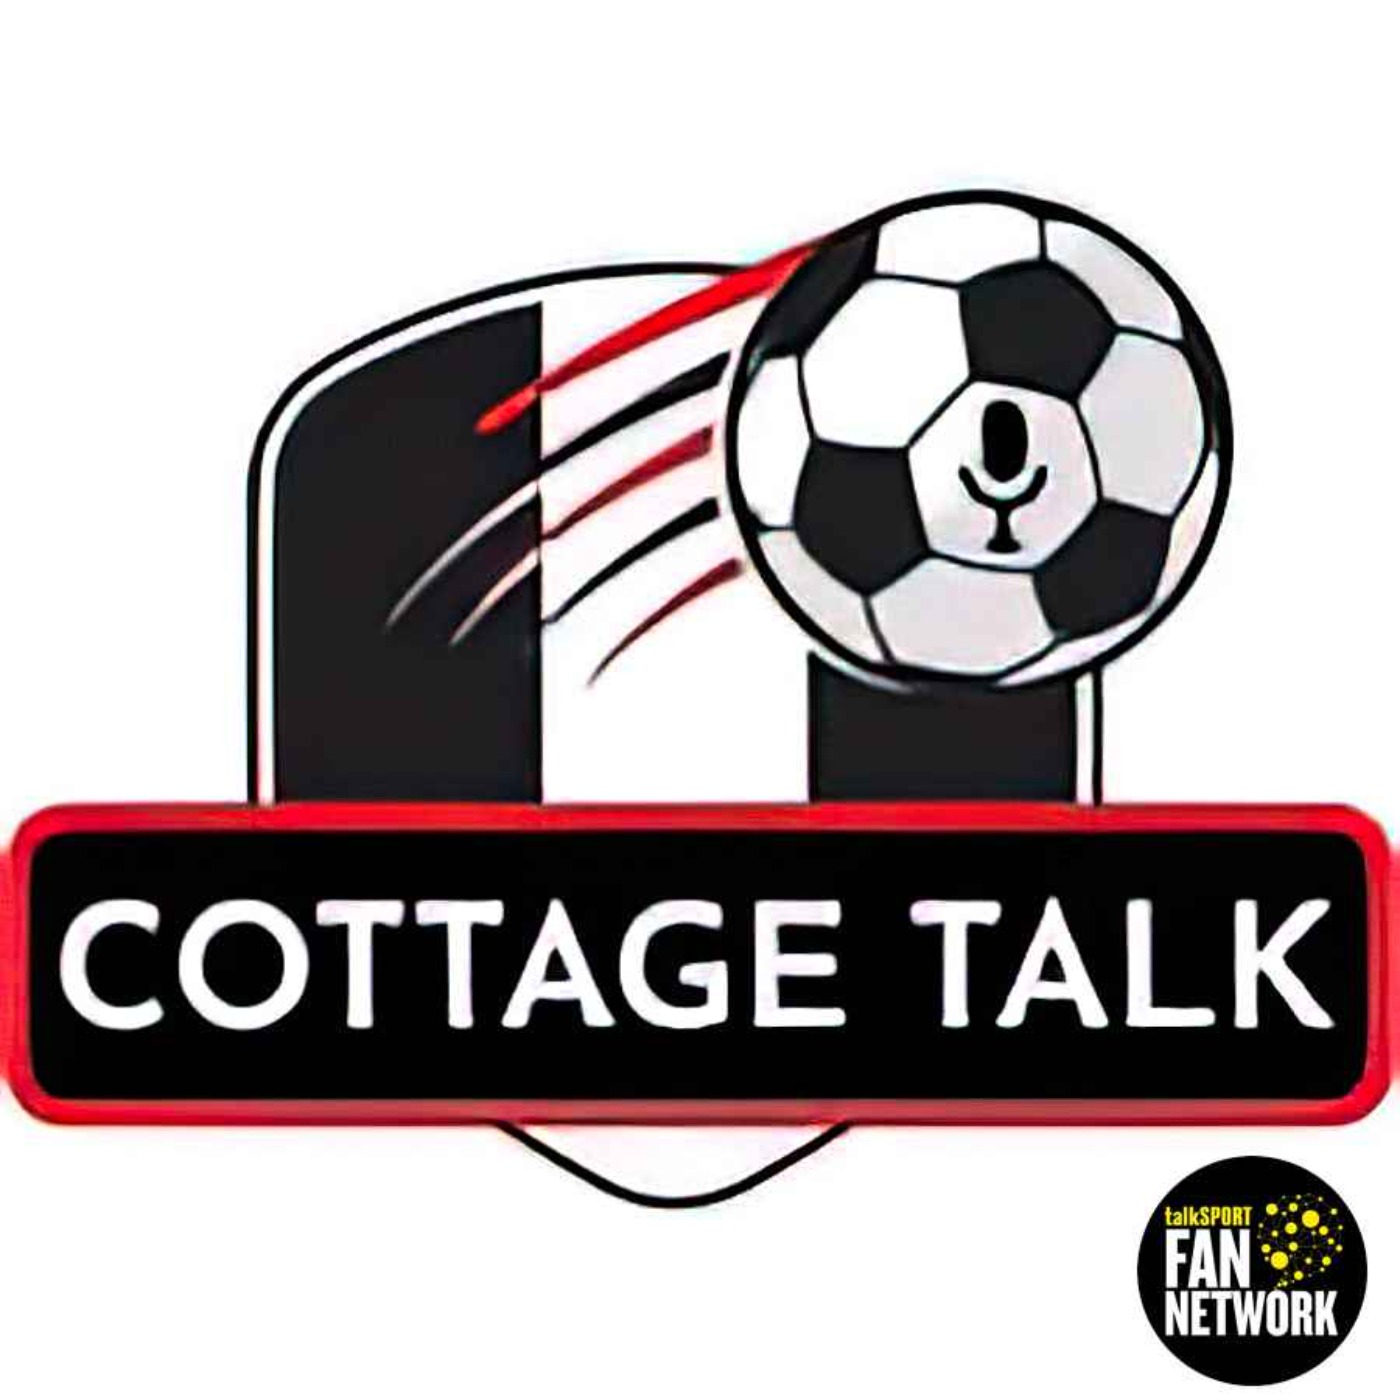 Cottage Talk Full Time: Fulham Own North London At Craven Cottage